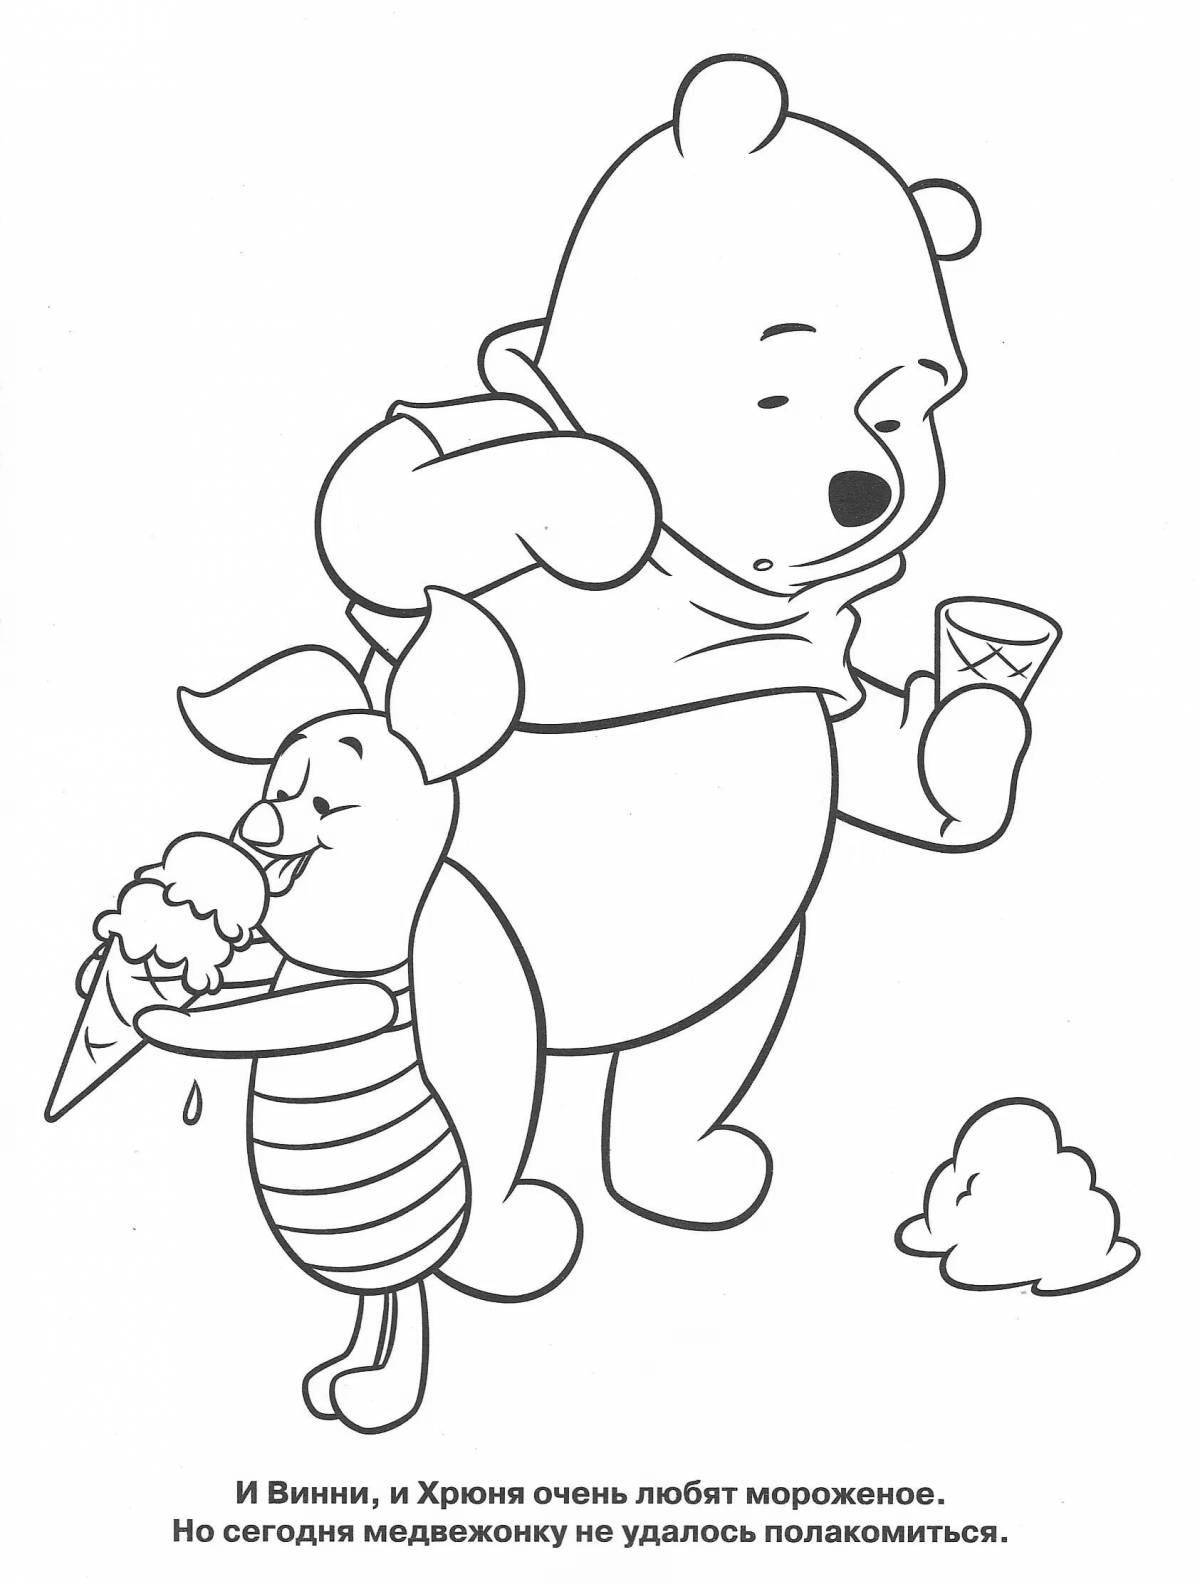 Bright collection of coloring pages for children